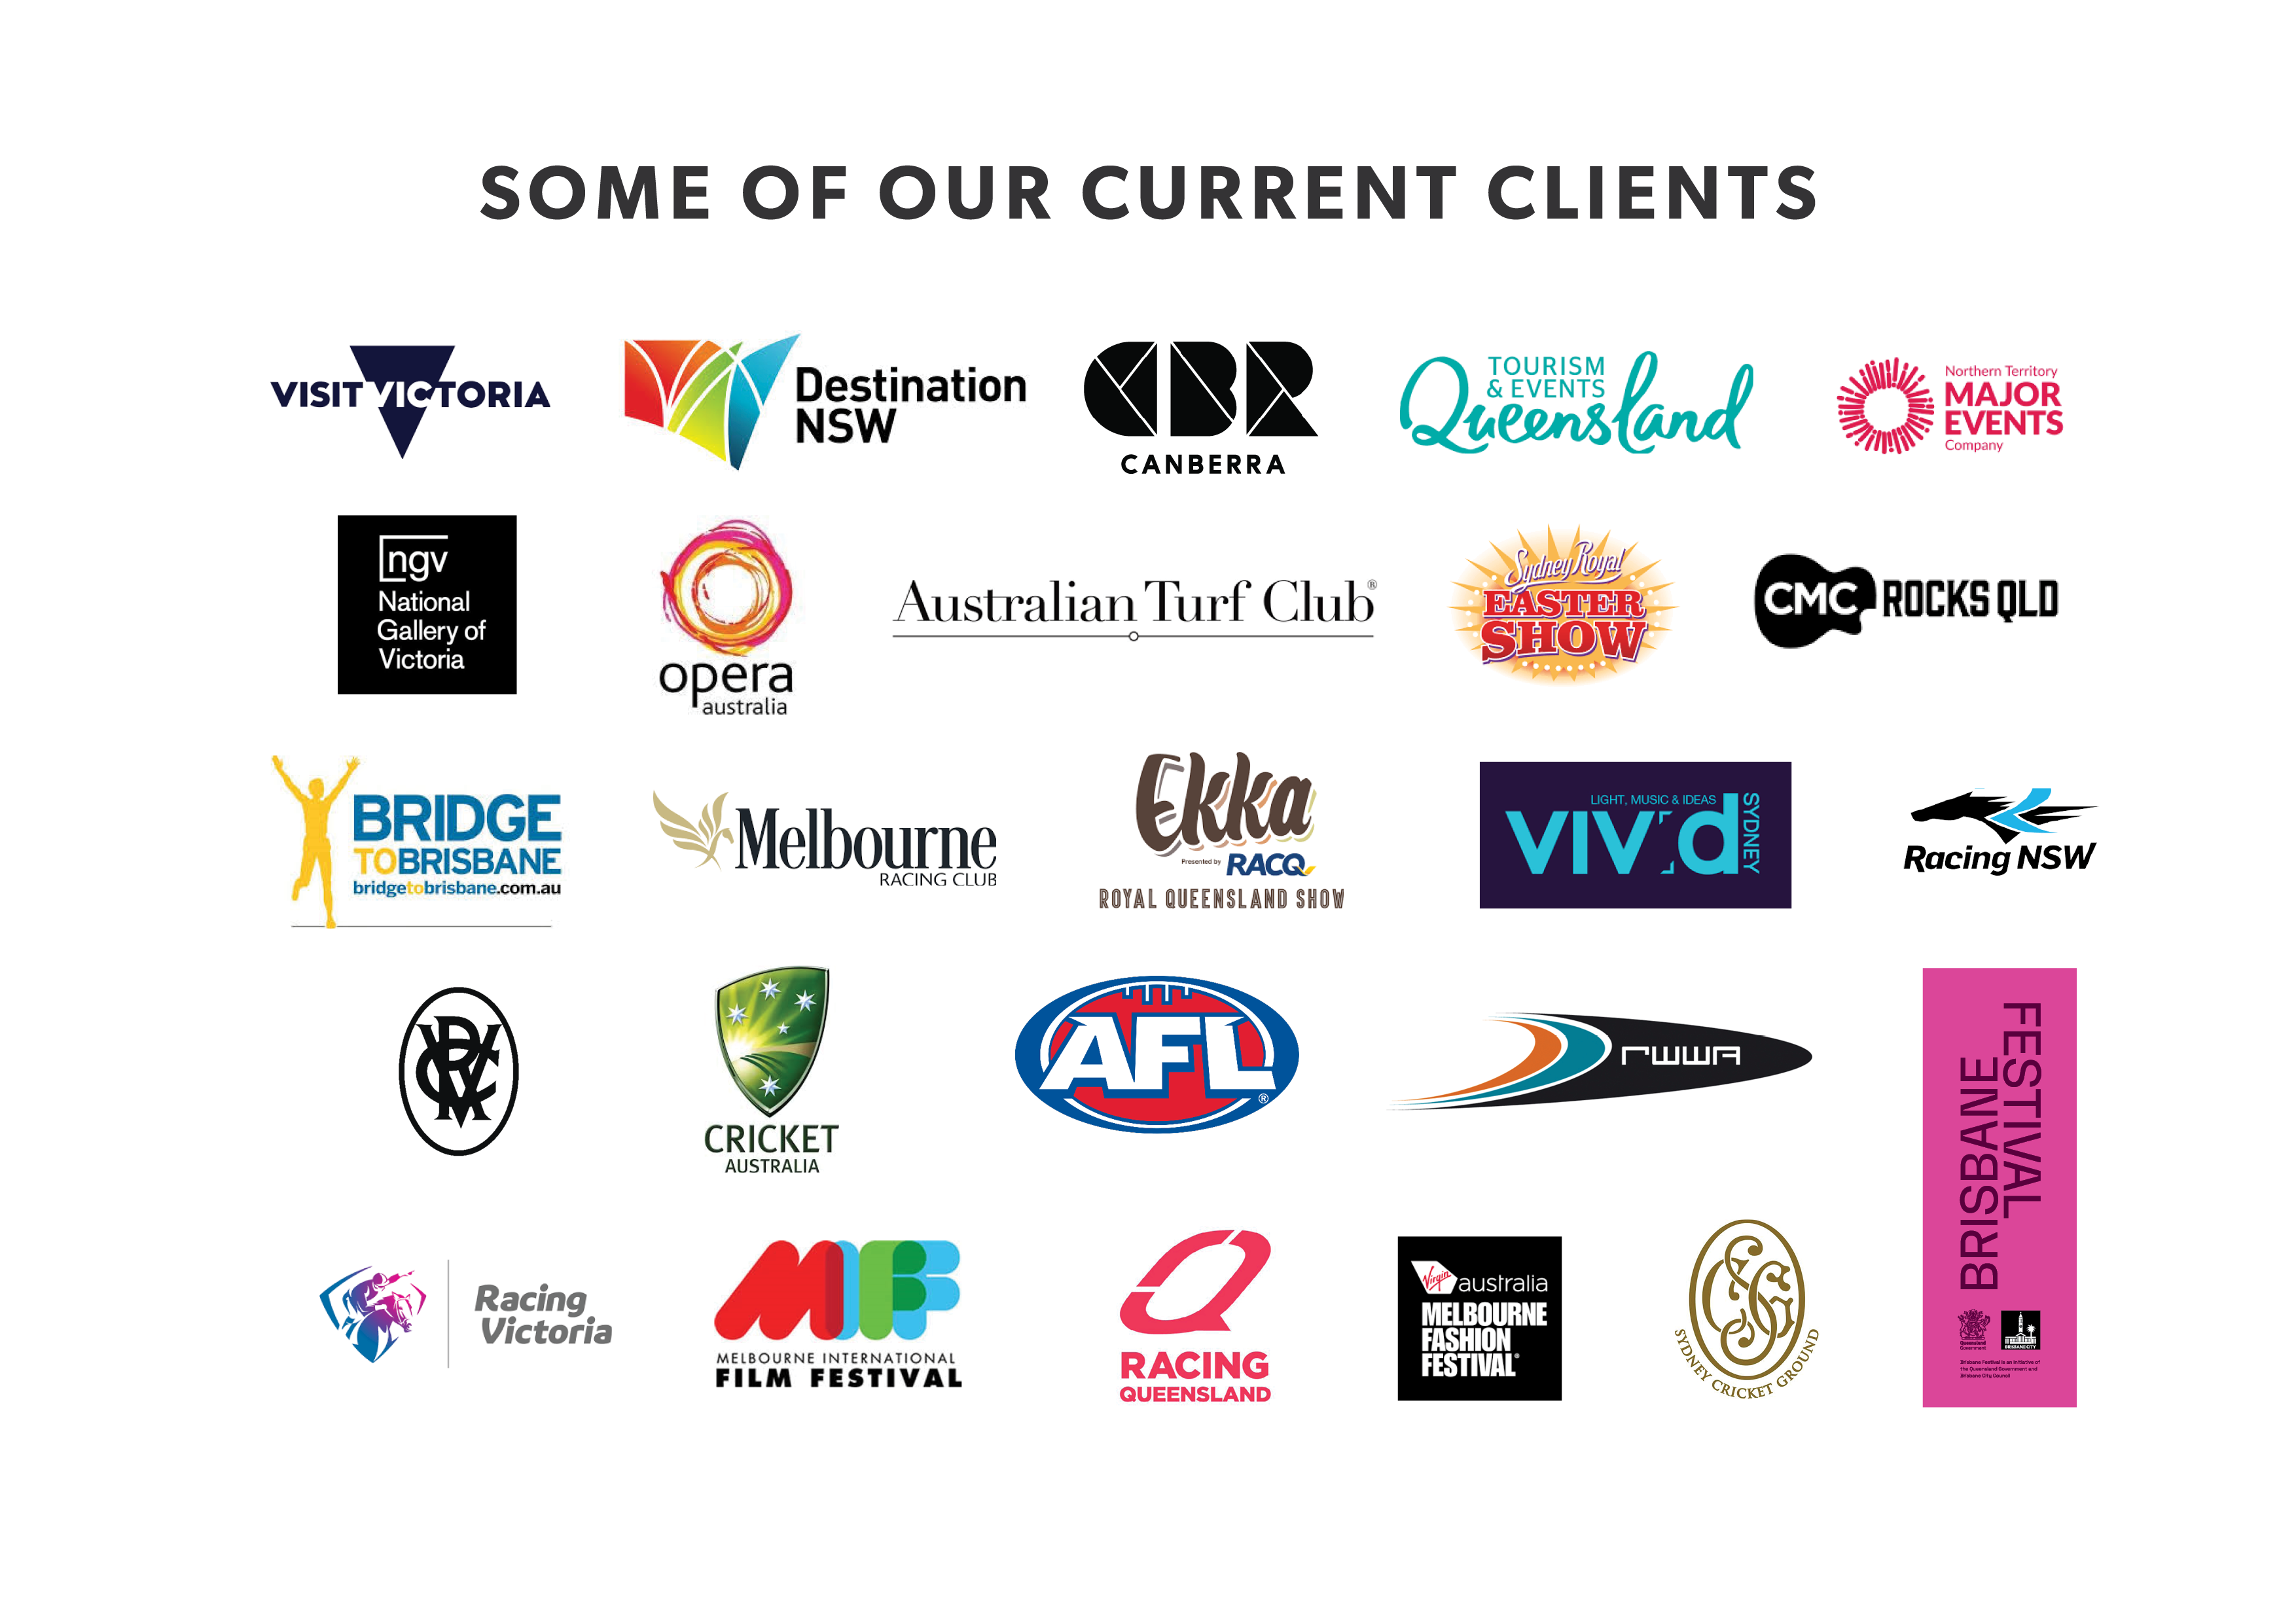 Some of our clients